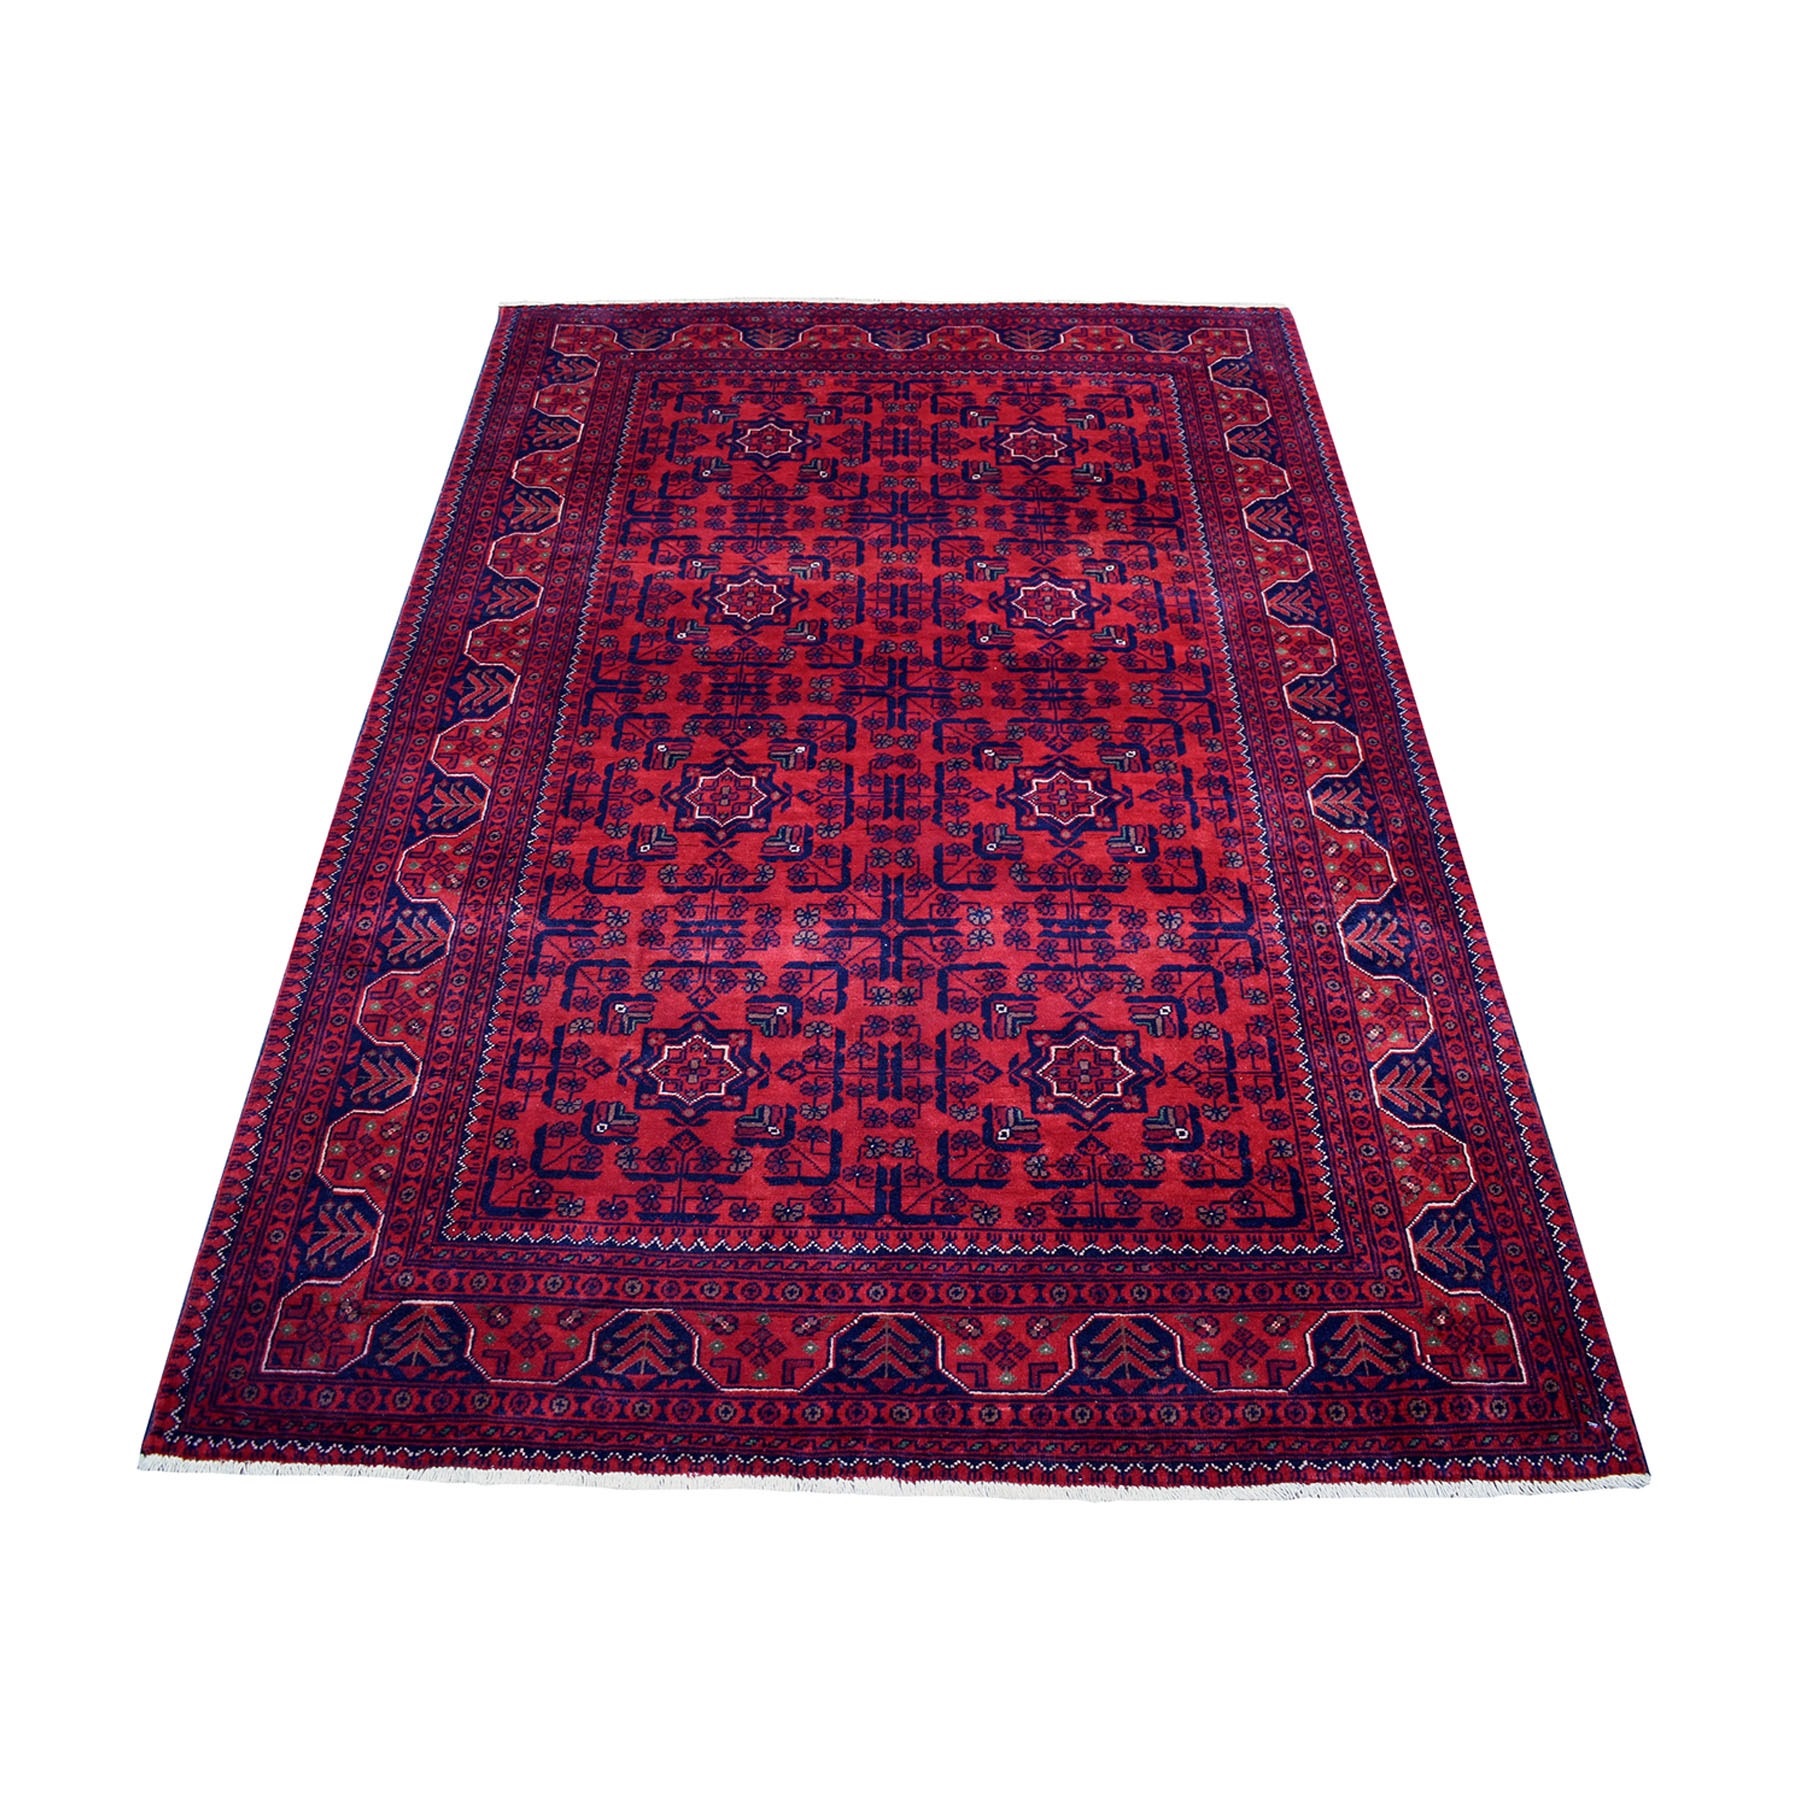 4'2"x6'4" Afghan Khamyab Hand Woven Soft Vibrant Wool Deep and Saturated Red Oriental Rug 